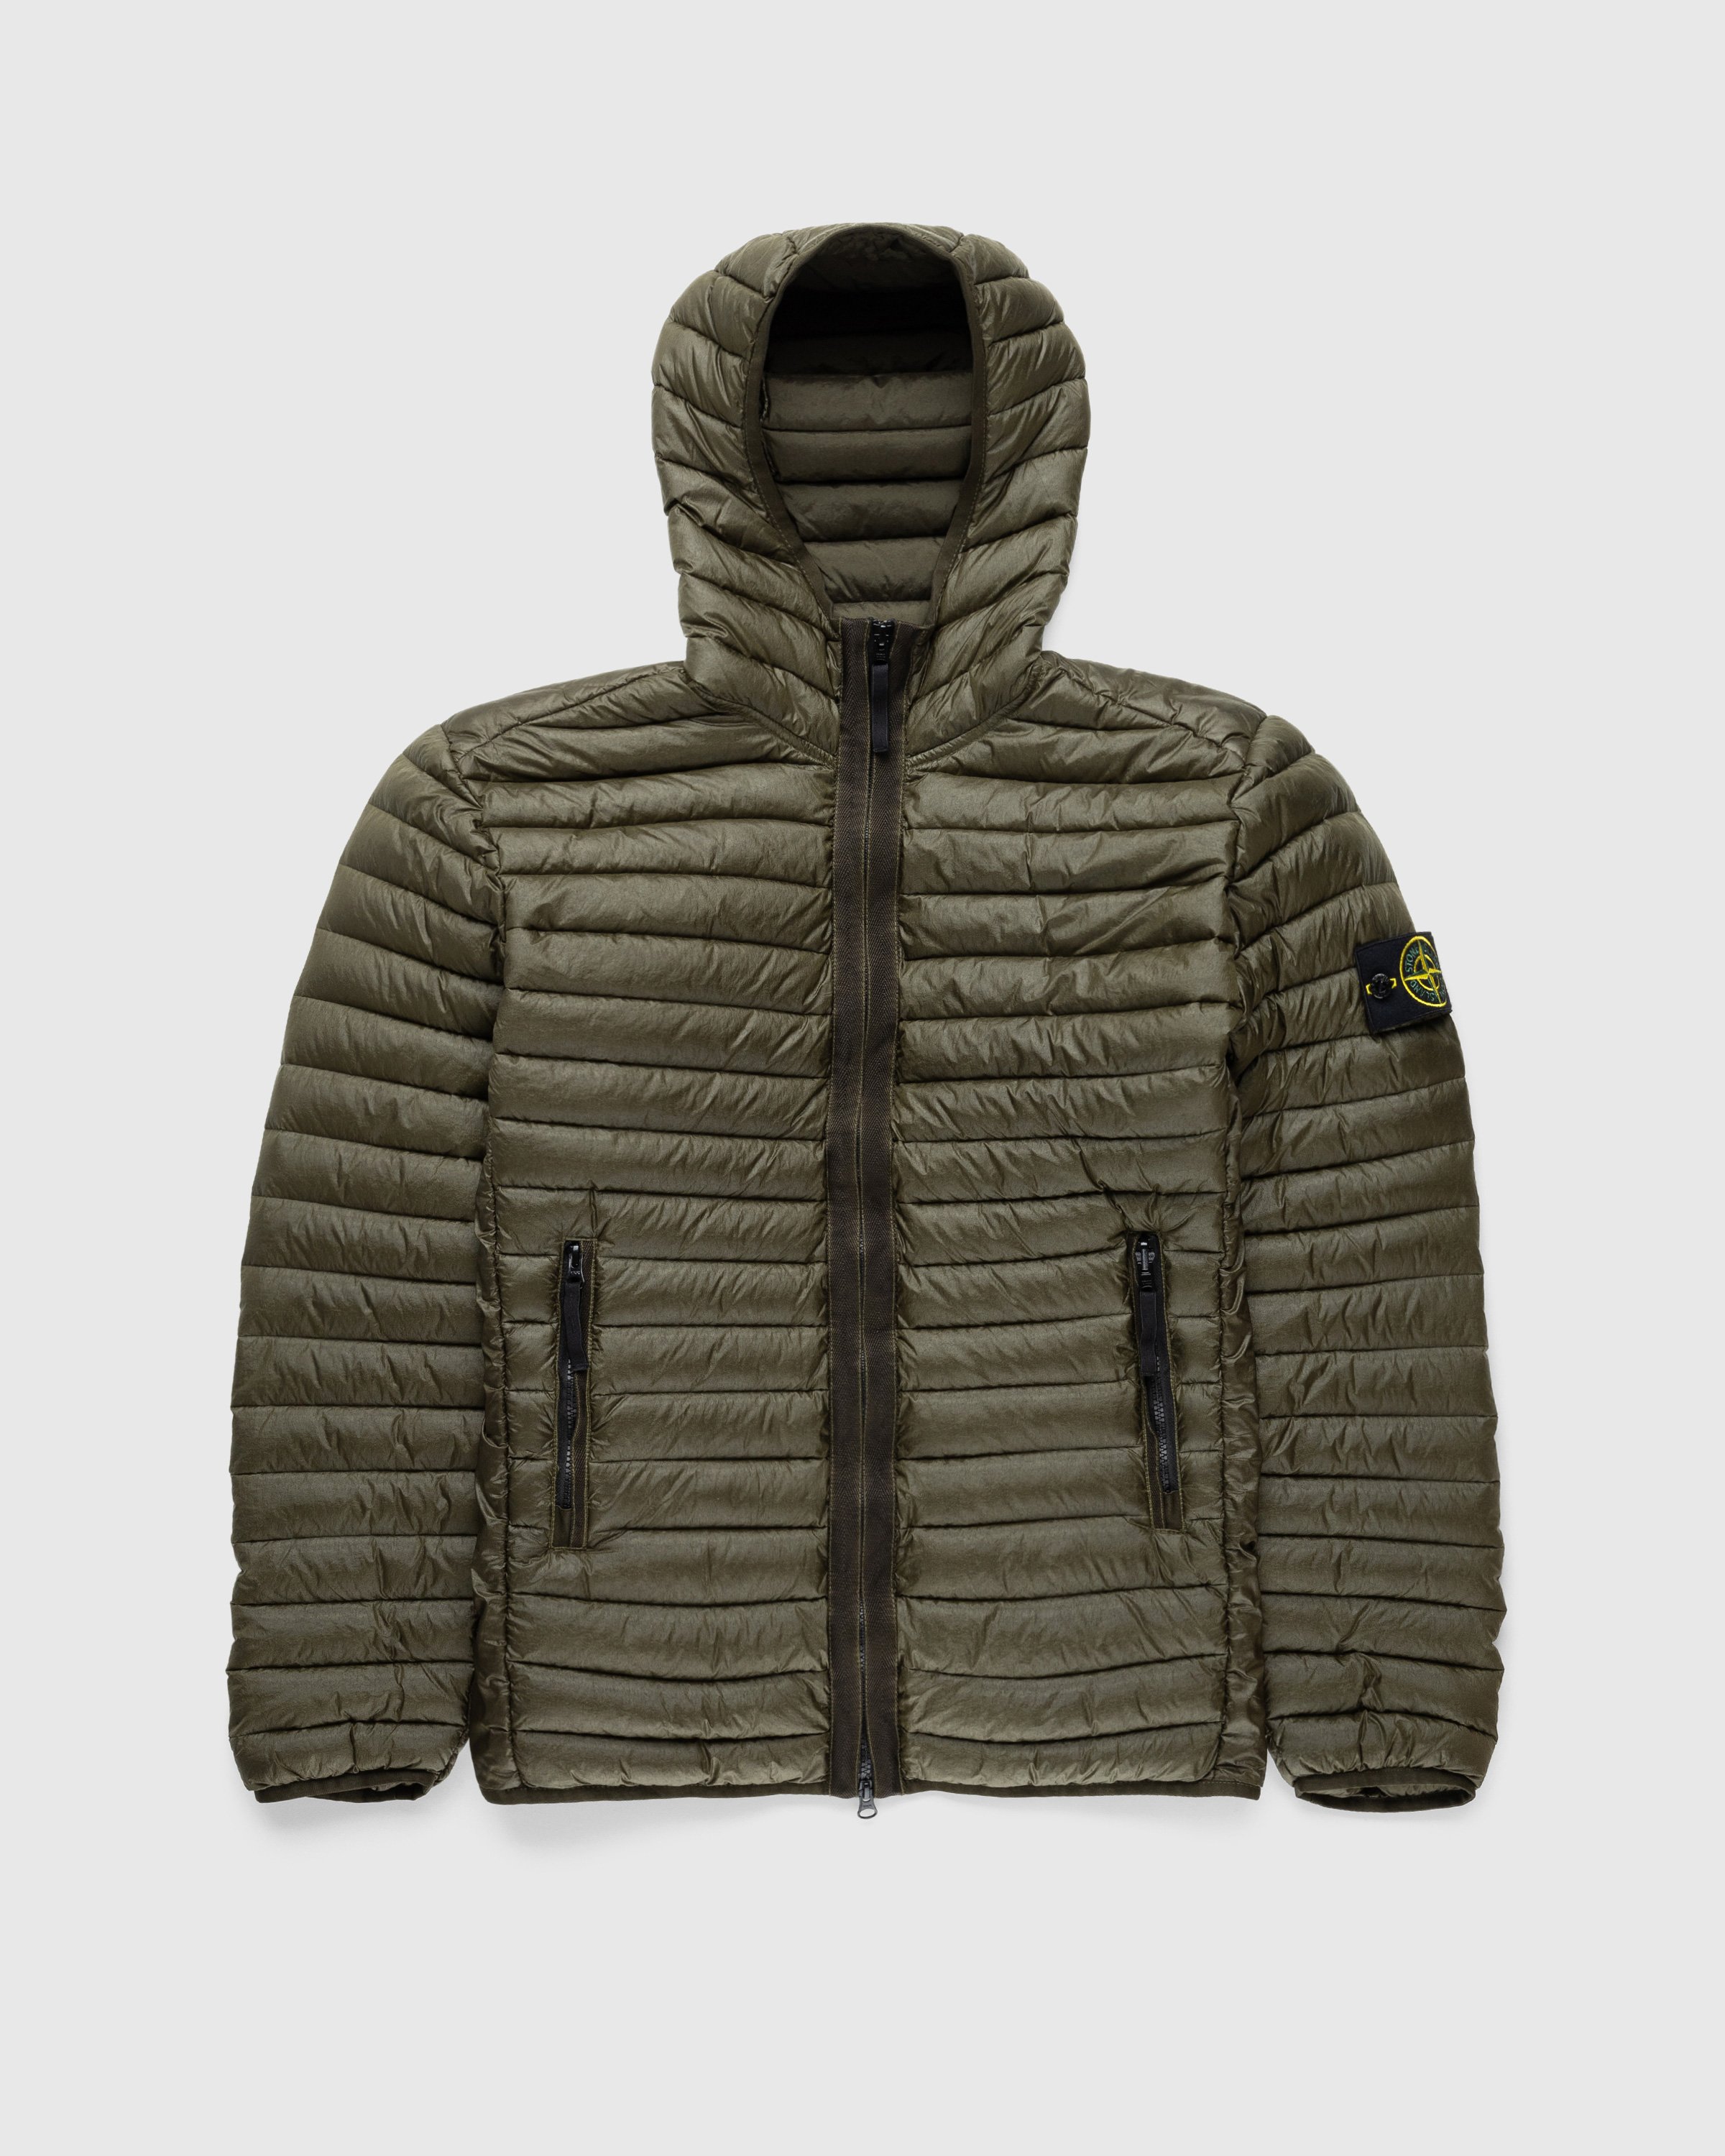 Stone Island - Packable Recycled Nylon Down Jacket Olive - Clothing - Green - Image 1